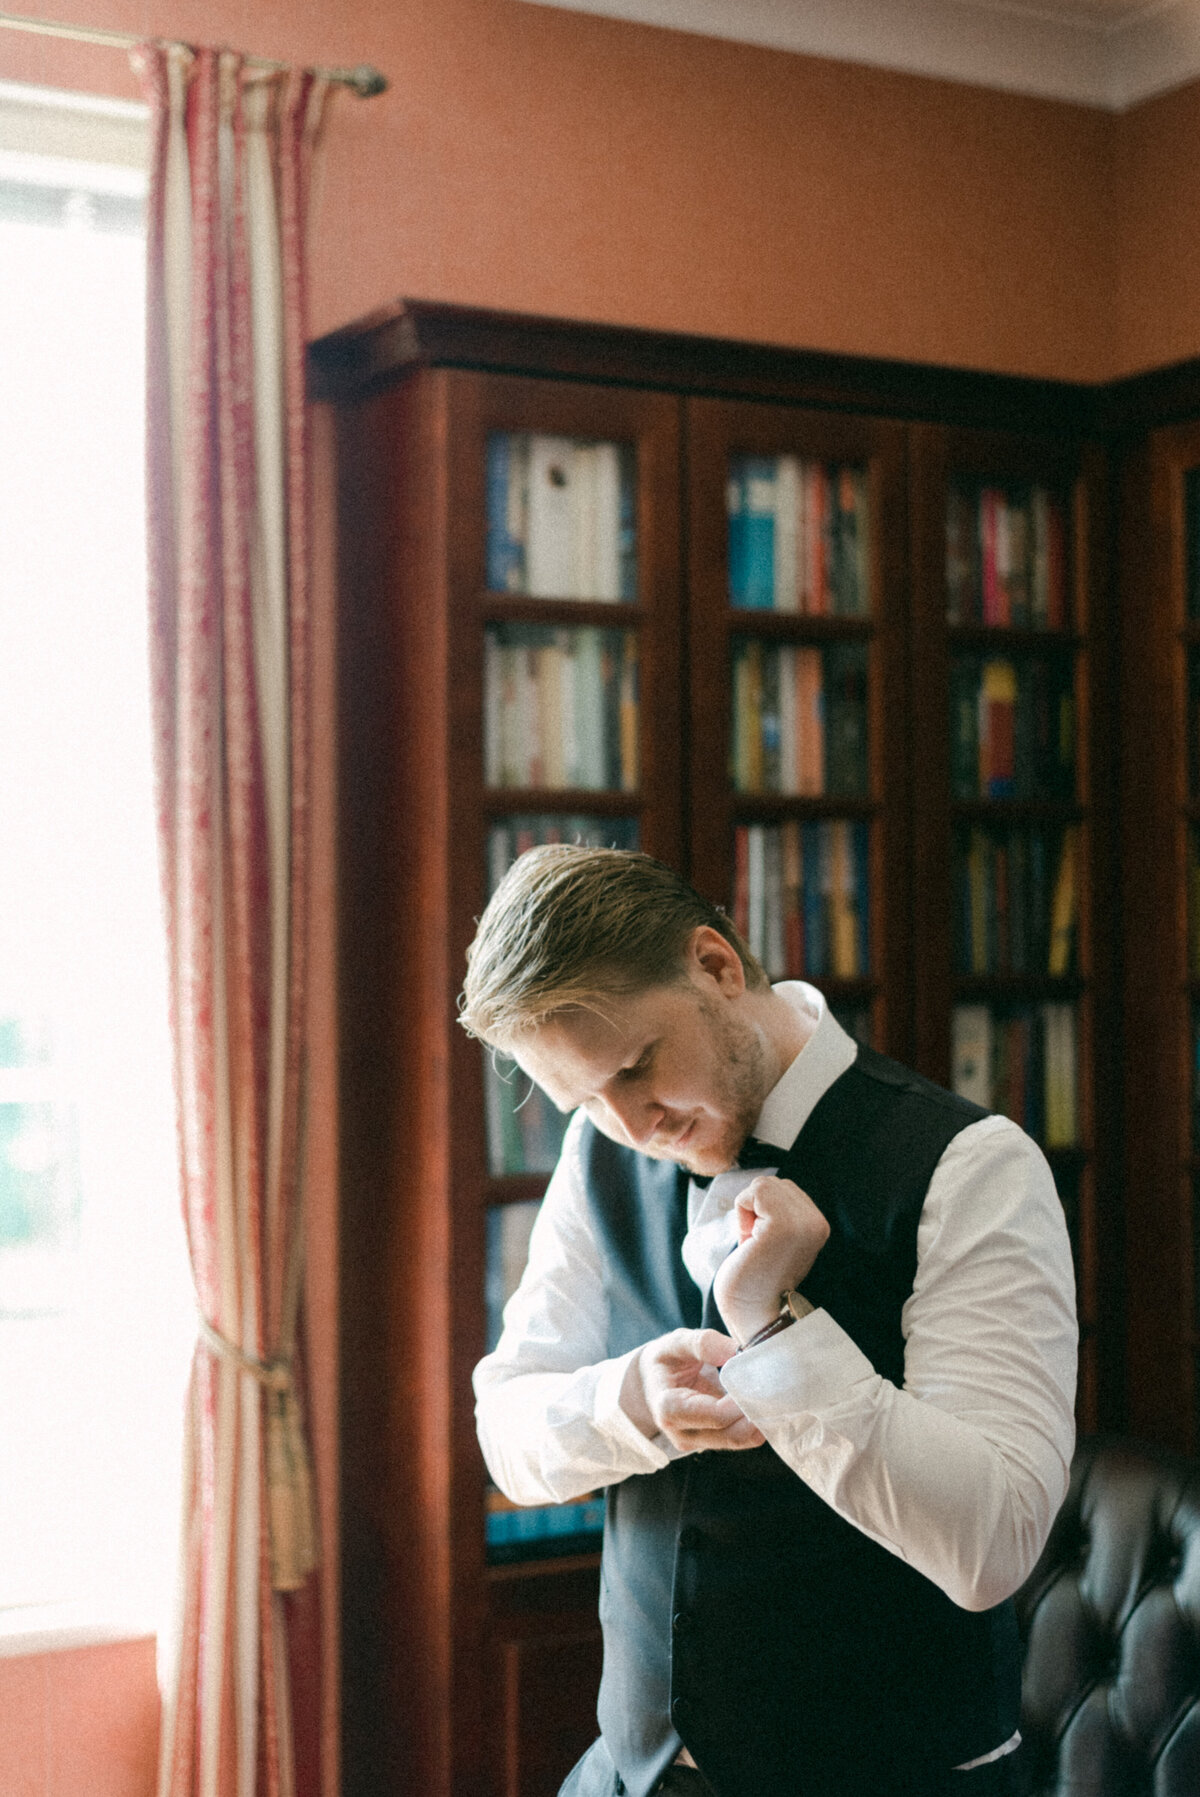 The groom is getting ready in an image photographed by wedding photographer Hannika Gabrielsson.